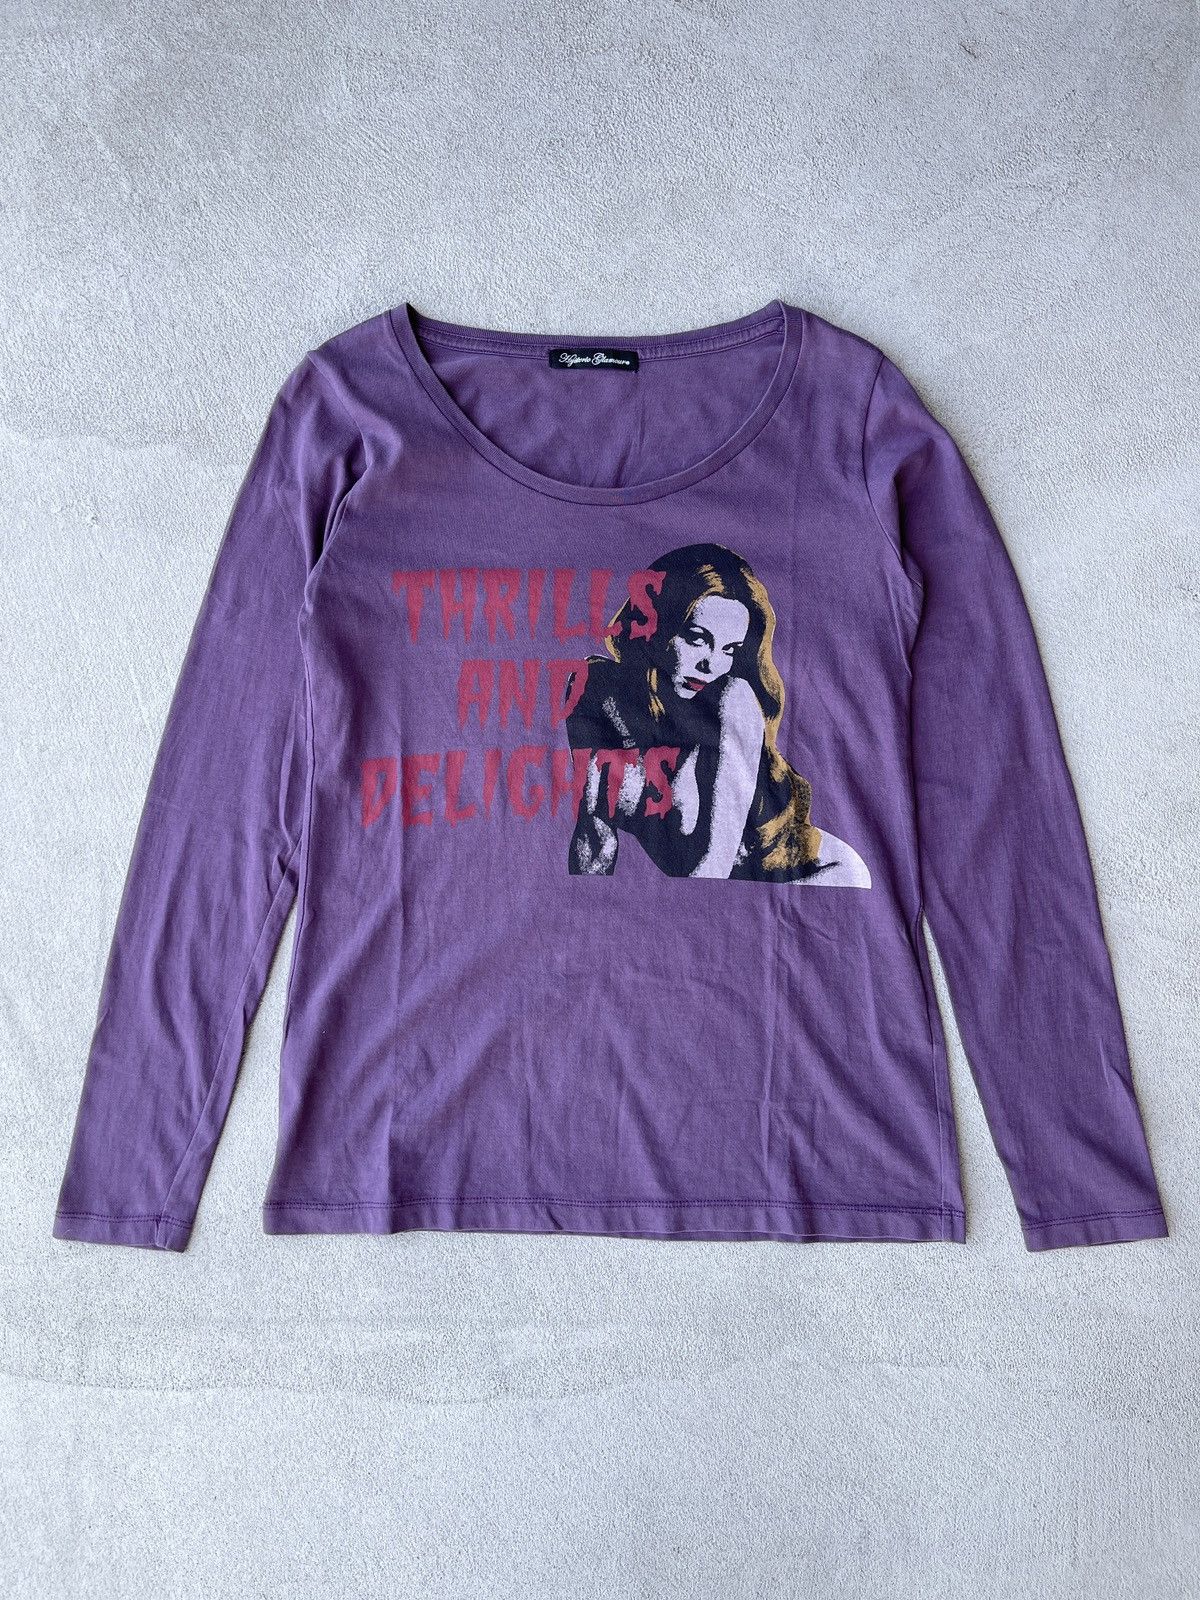 Vintage - STEAL! 2000s Hysteric Glamour Thrills & Delights Girl LS Tee - 3